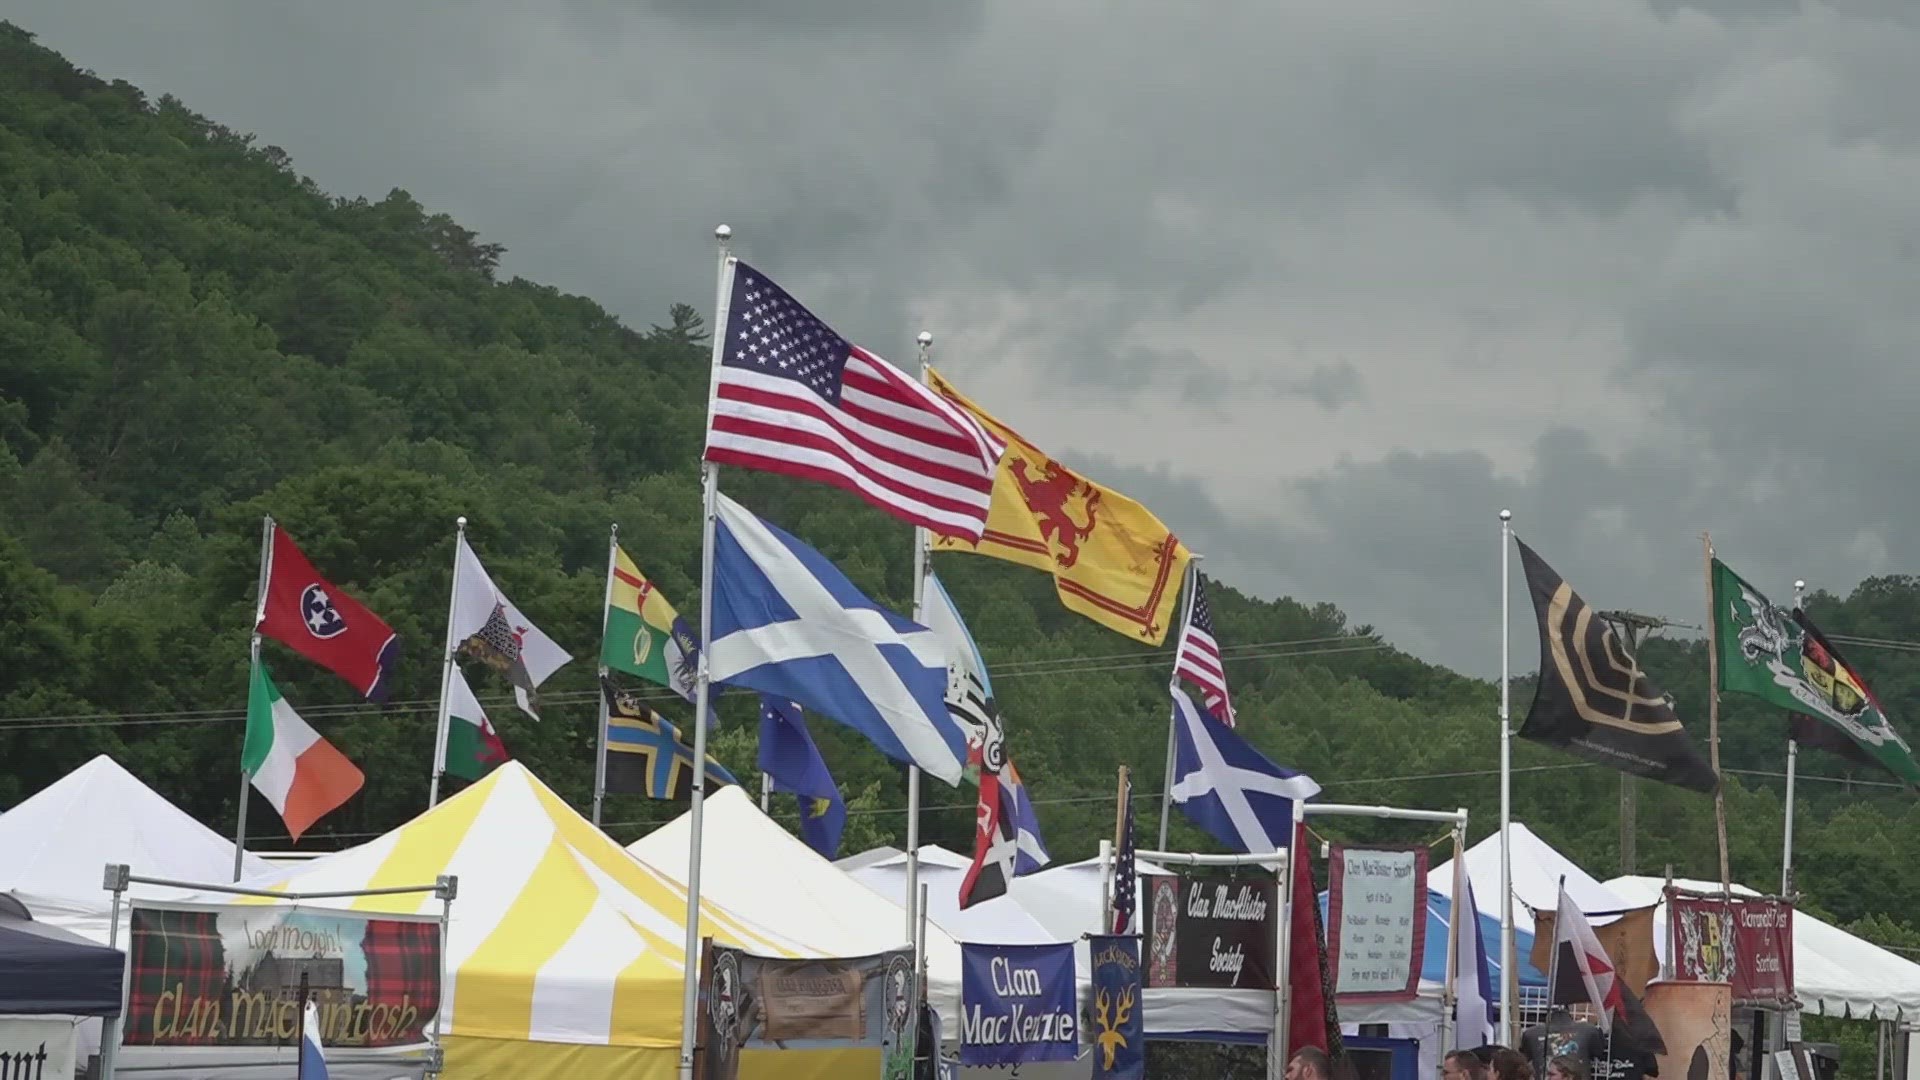 Organizers said the festival is Tennessee's largest celebration of not just Scottish culture but also Celtic and Irish.